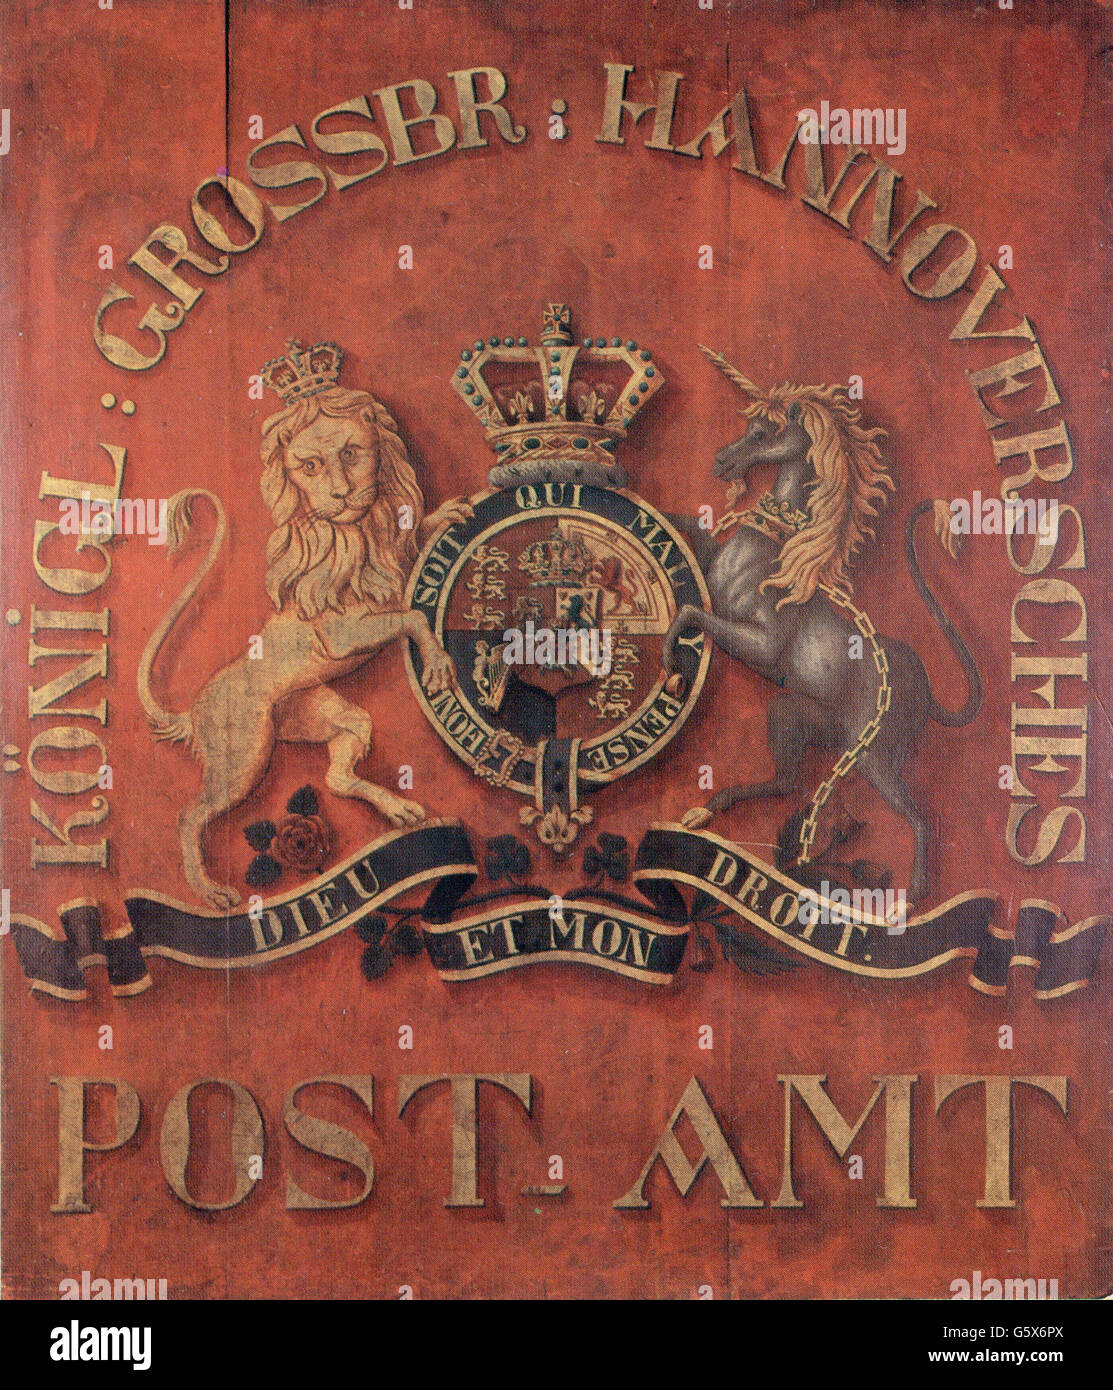 mail / post, post office, Germany, Royal Great Britannic-Hanoveran mail, house sign, circa 1825, Additional-Rights-Clearences-Not Available Stock Photo